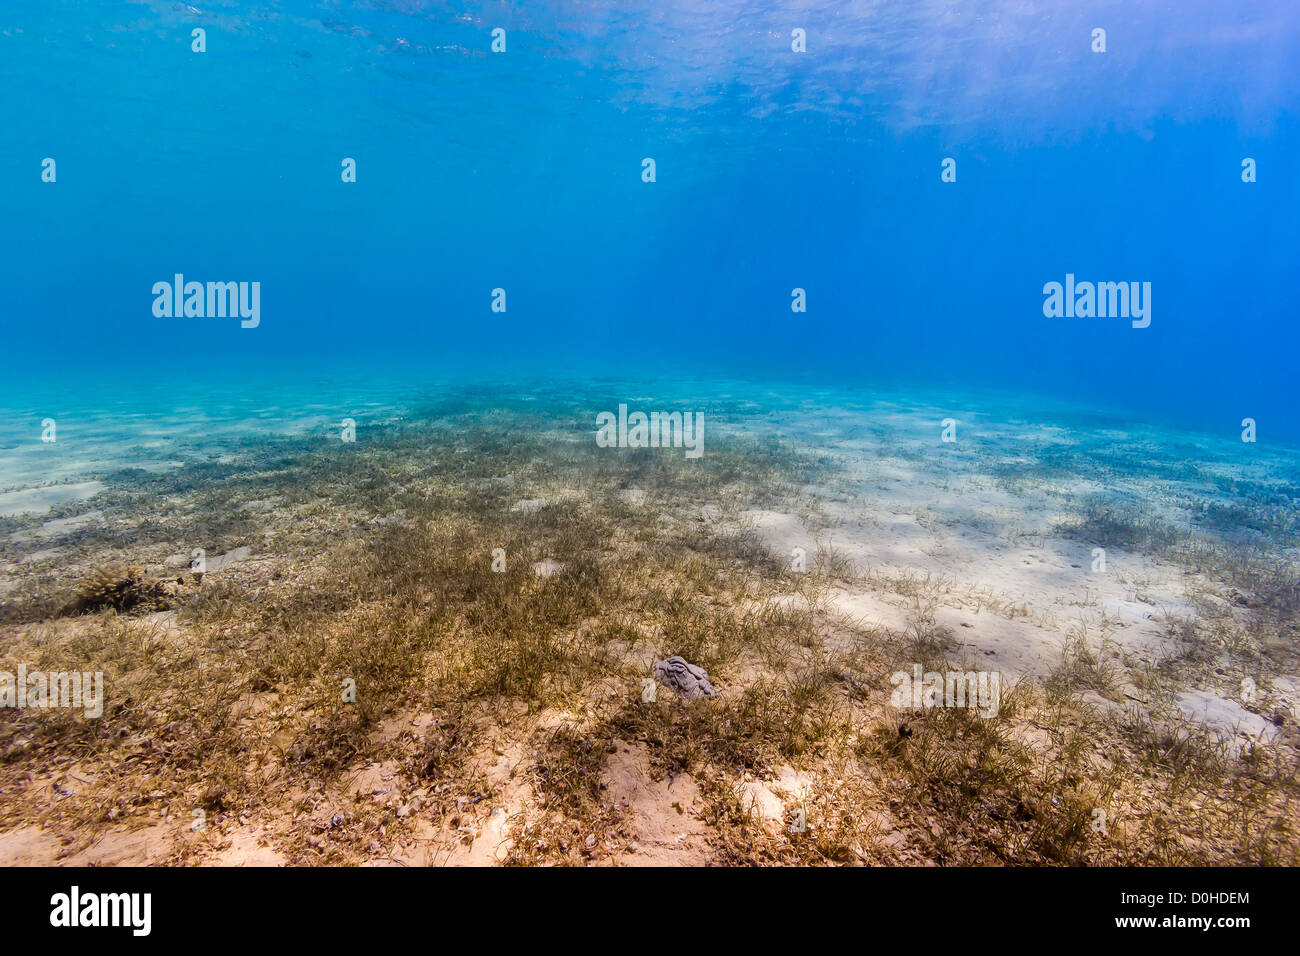 Sun rays illuminate a seagrass sea bed in the shallow waters of the red sea Stock Photo